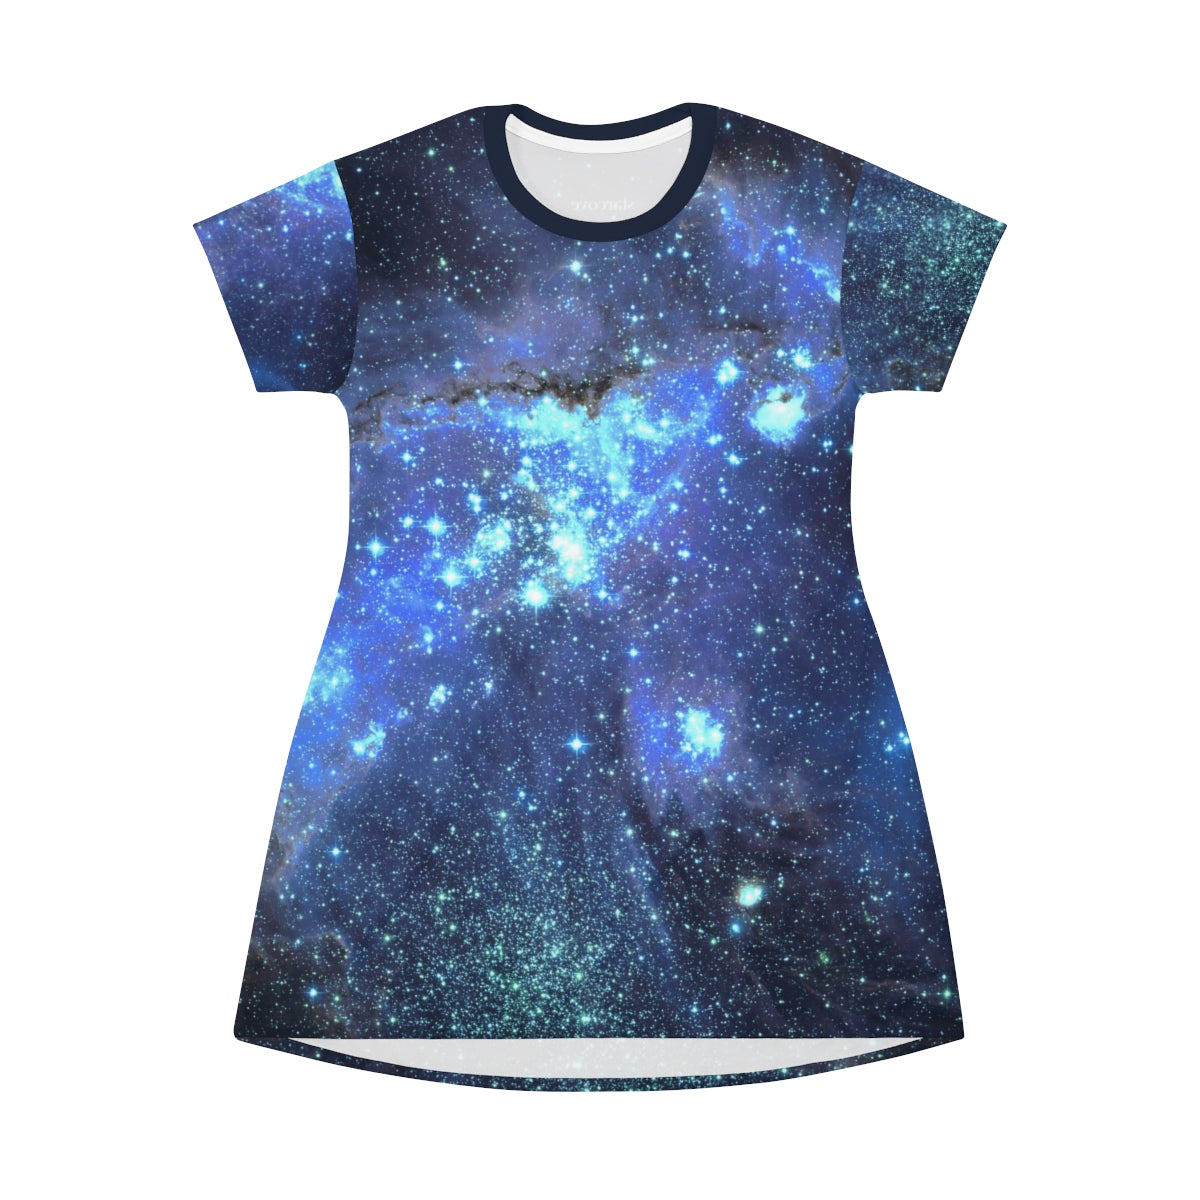 Space Galaxy T-shirt Dress, Blue Celestial Constellation Outer Space Star Print Festival Party Night Sky Casual Summer Dress Starcove Fashion